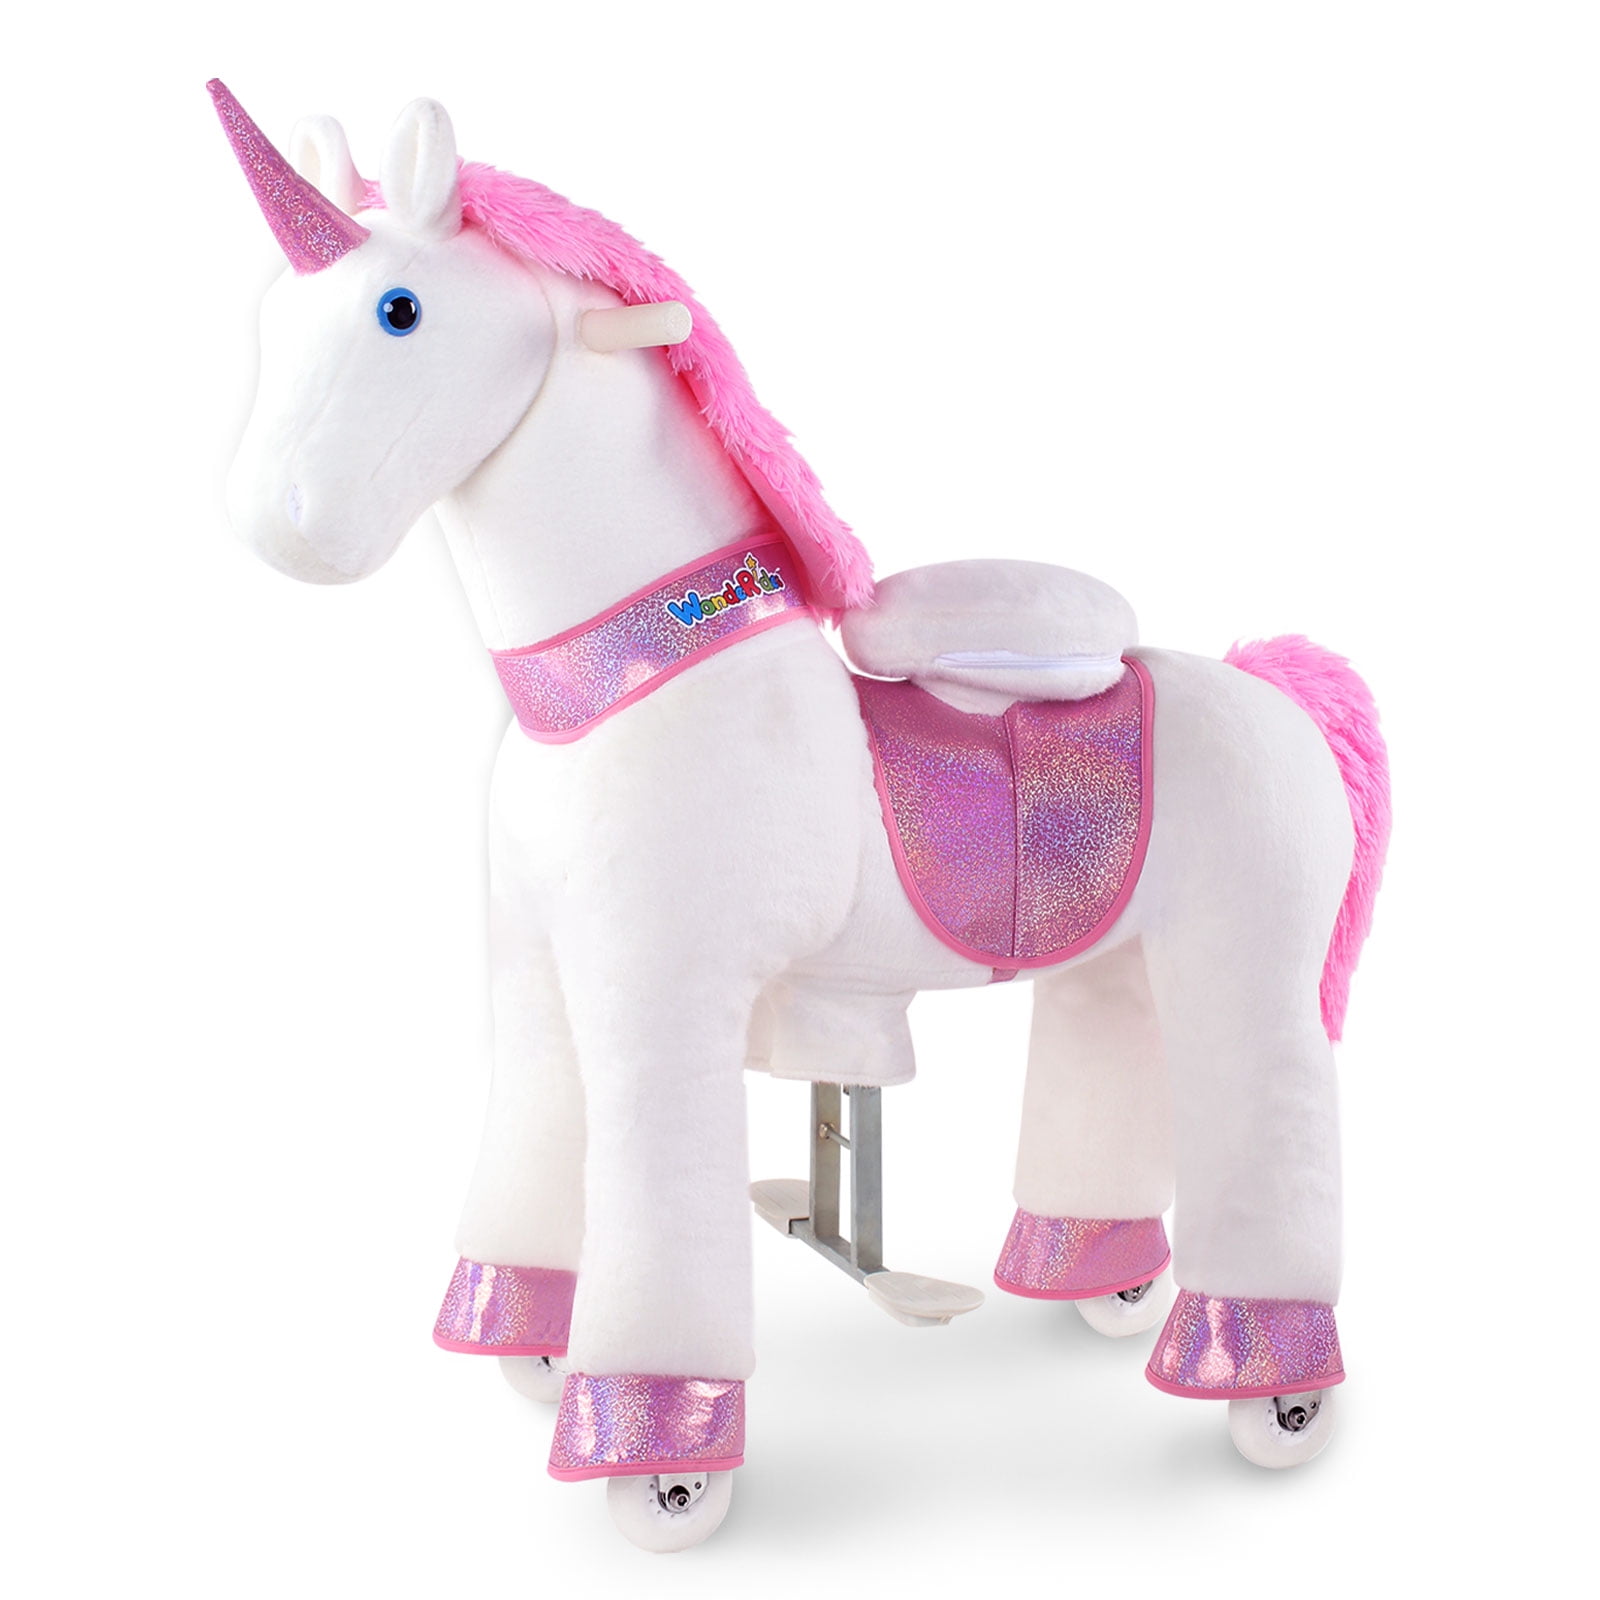 Official PonyCycle Unicorn Ride On ToySmall White Horse for Ages 3-5 Years 